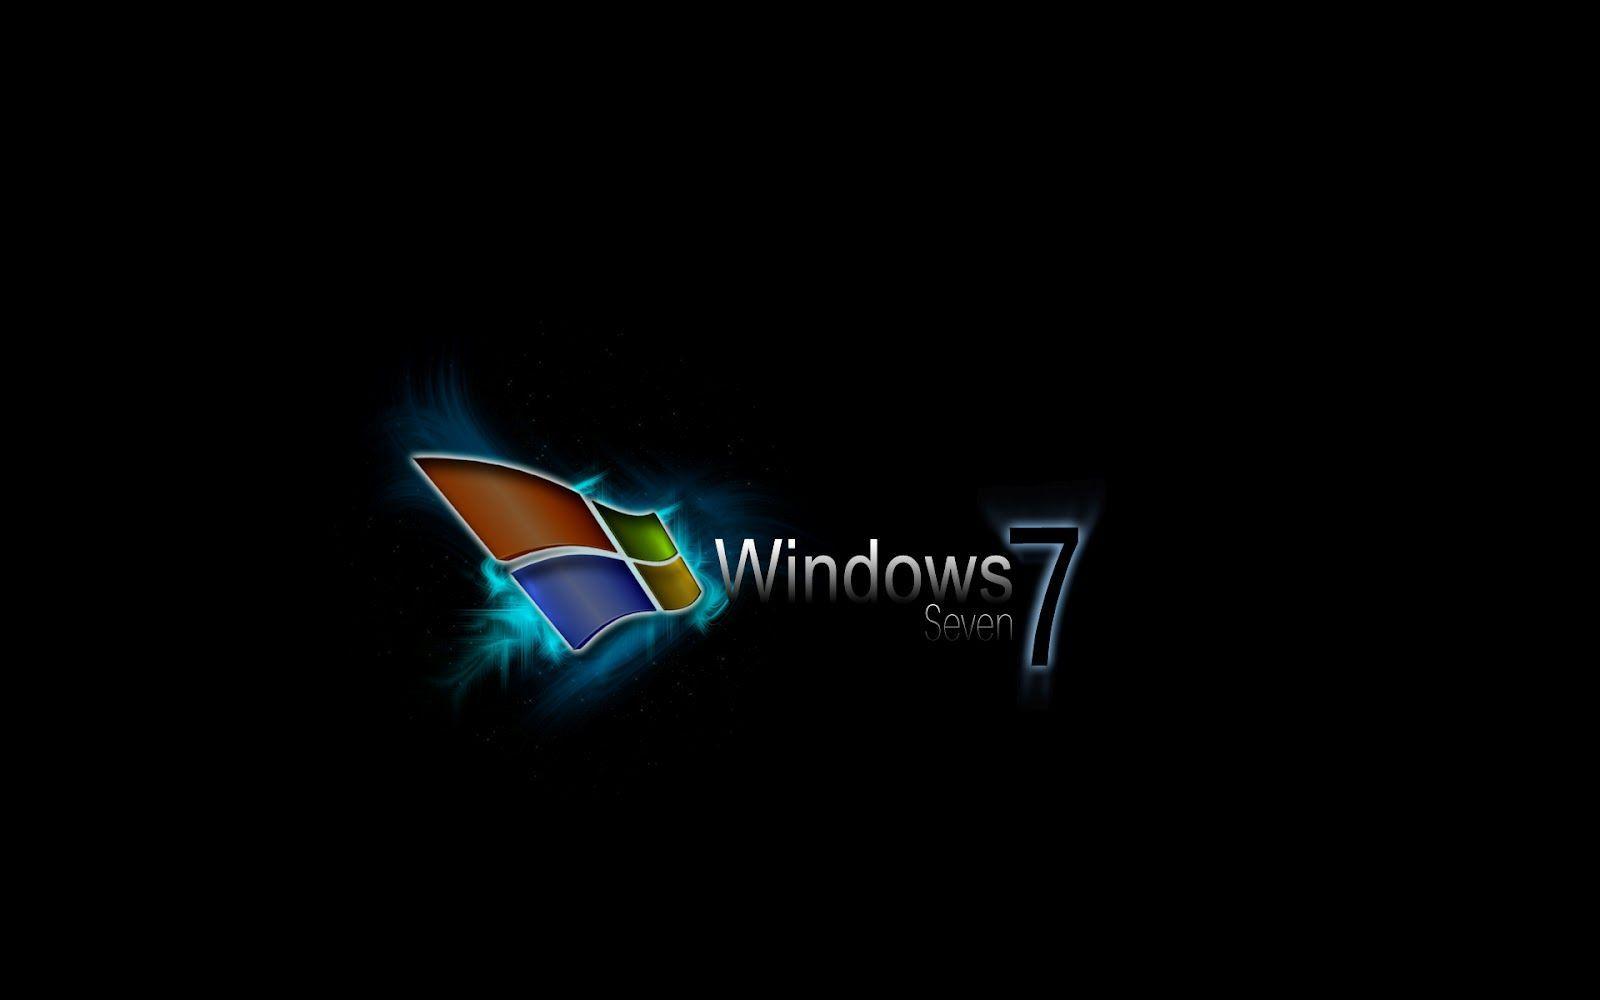 Wallpaper For > Animated Gif Background Windows 7